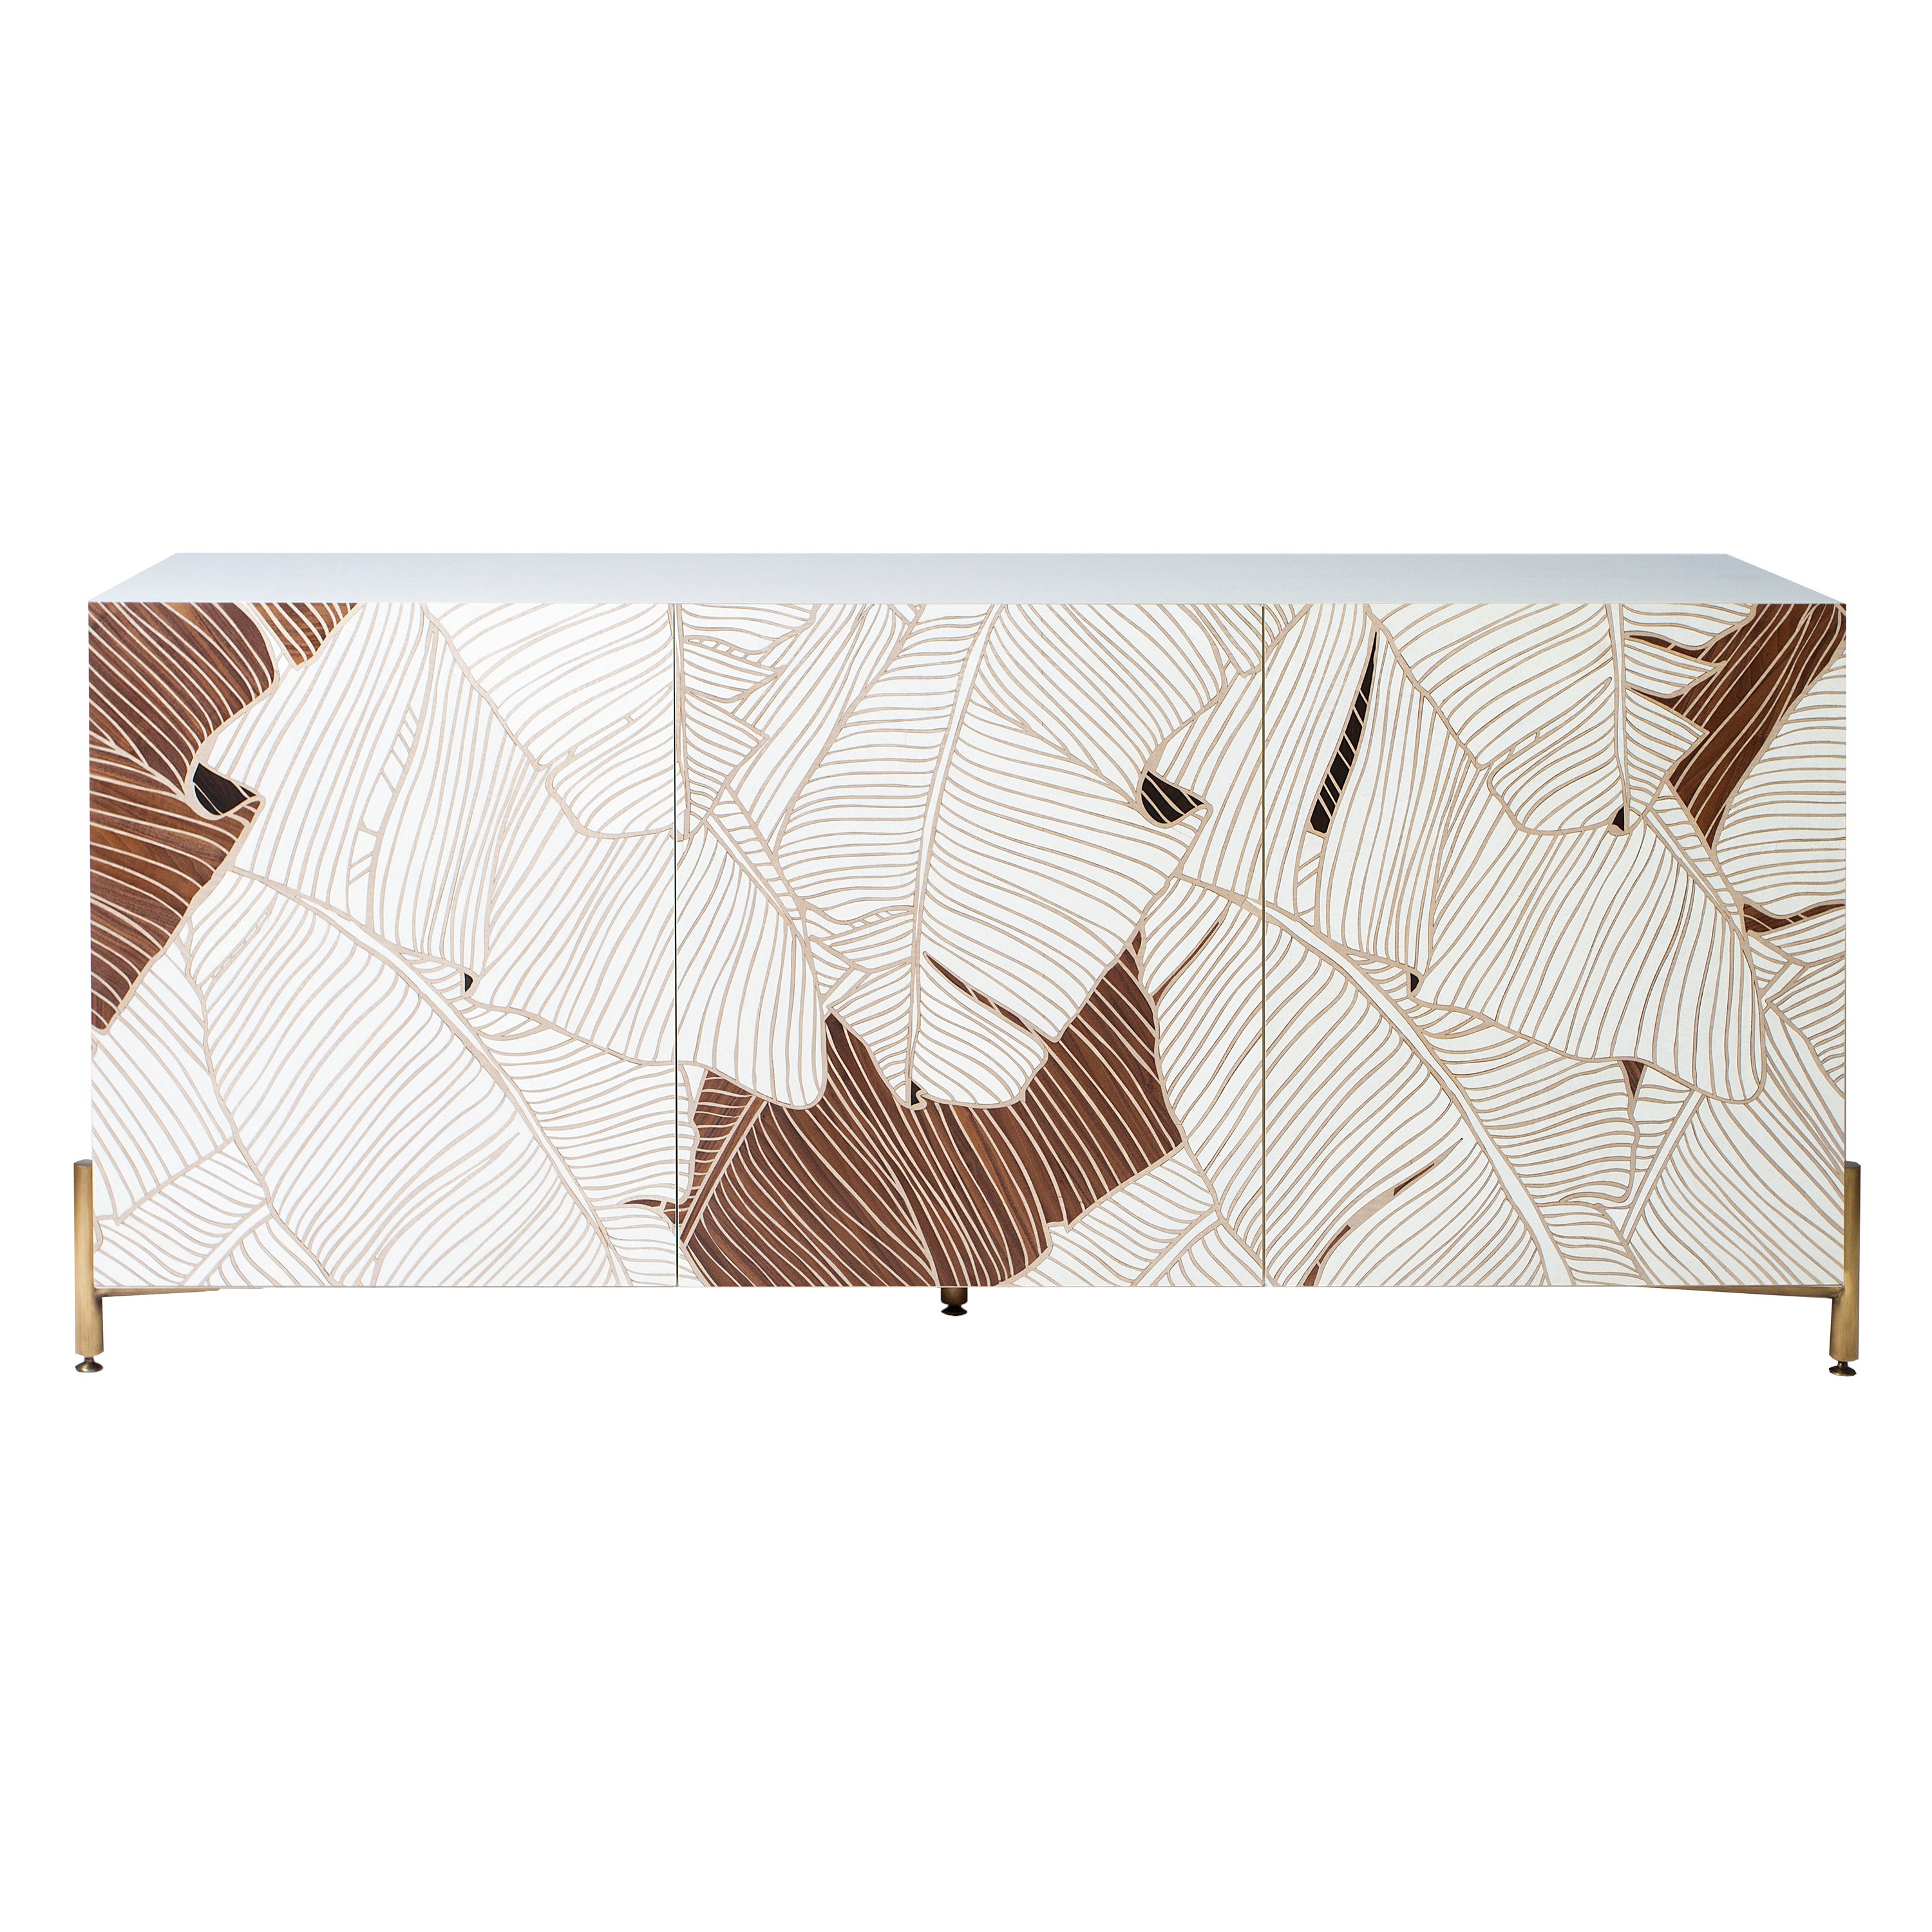 21st Century, Inlaid Sideboard in White Maple Canaletto Ziricote, Hebanon, Italy For Sale